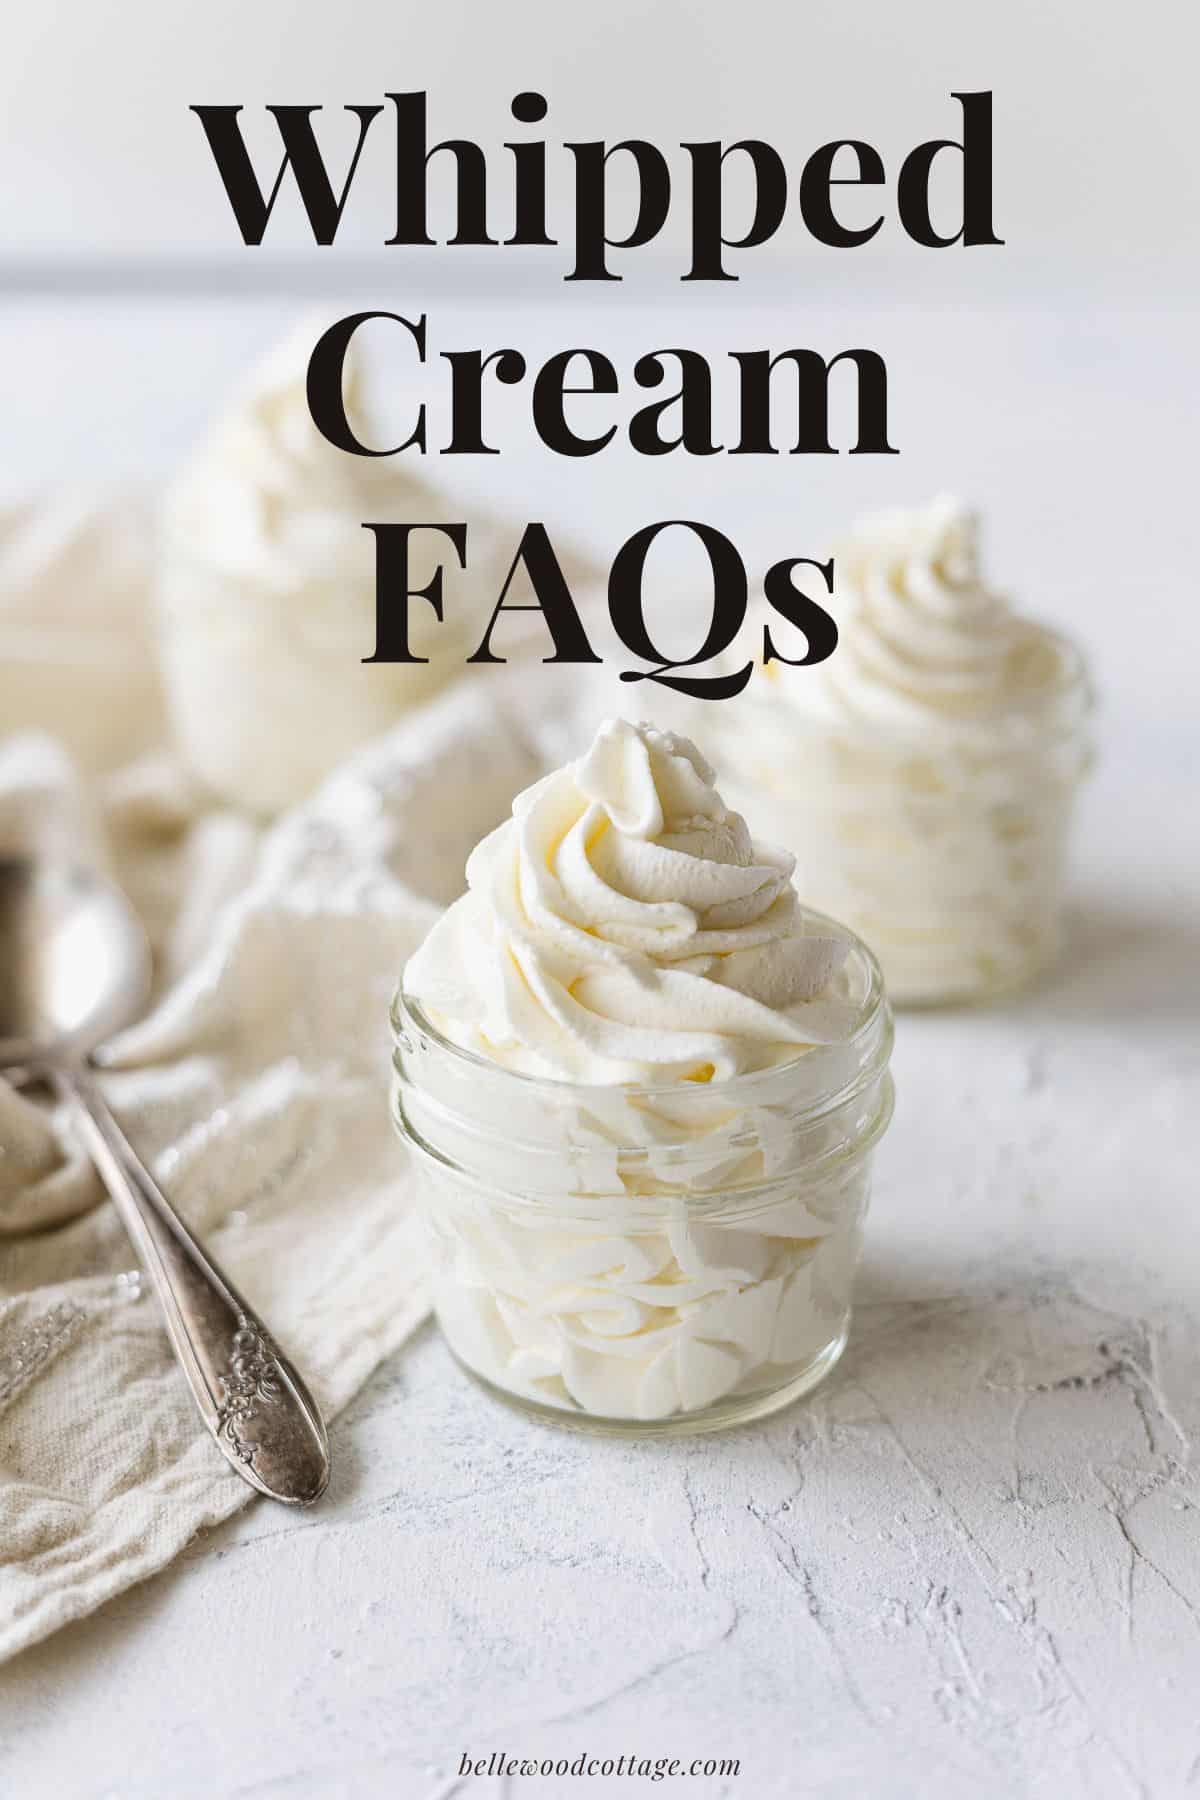 Fresh whipped cream piped into 4 ounce mason jars with the words, "Whipped Cream FAQs".